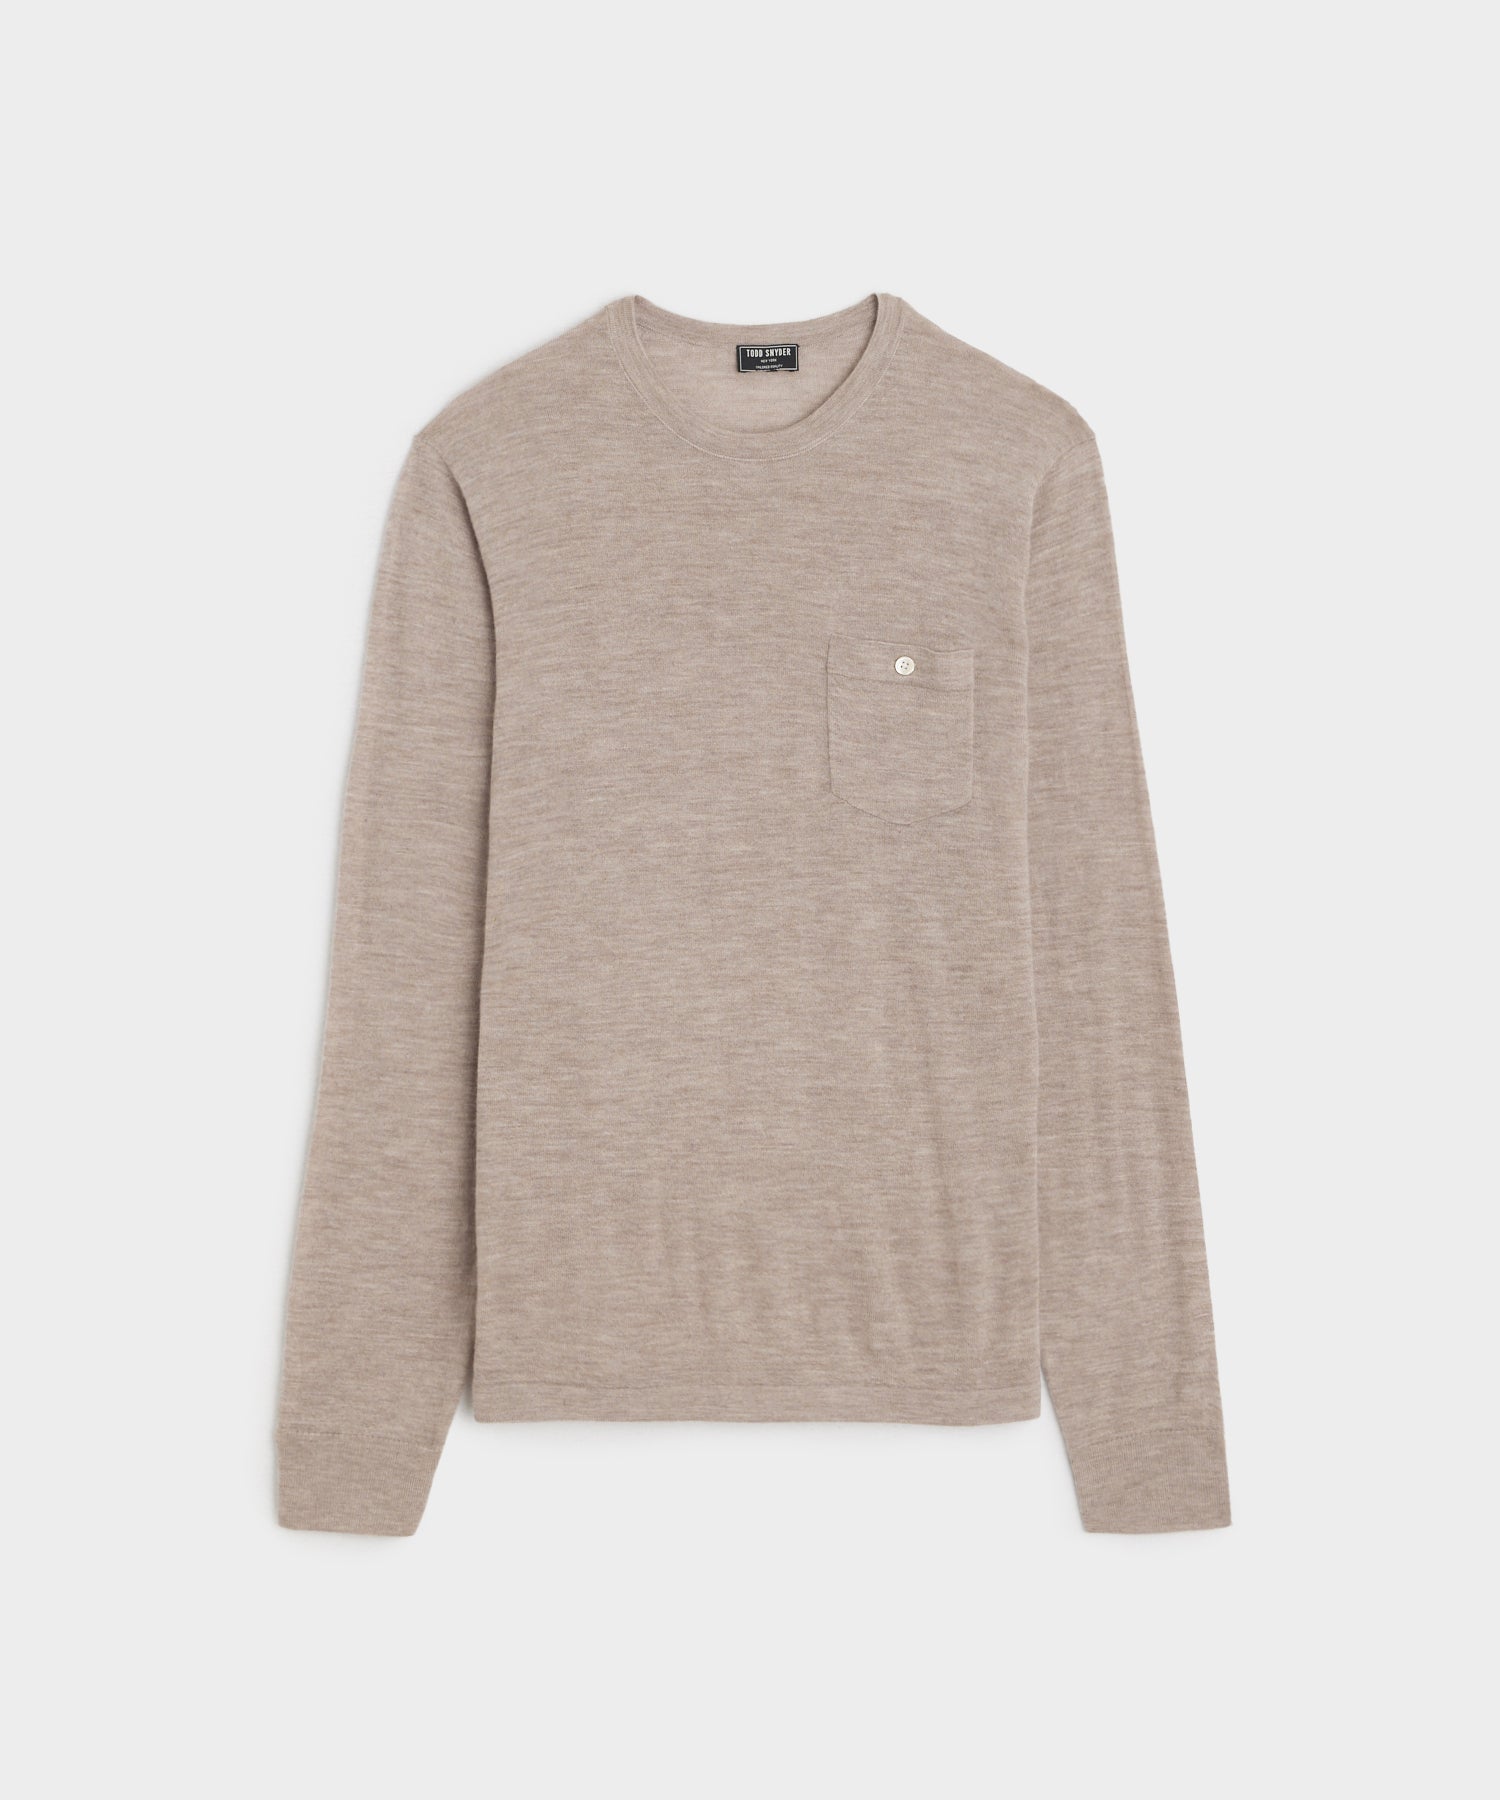 Cashmere Pocket Tee in Toast